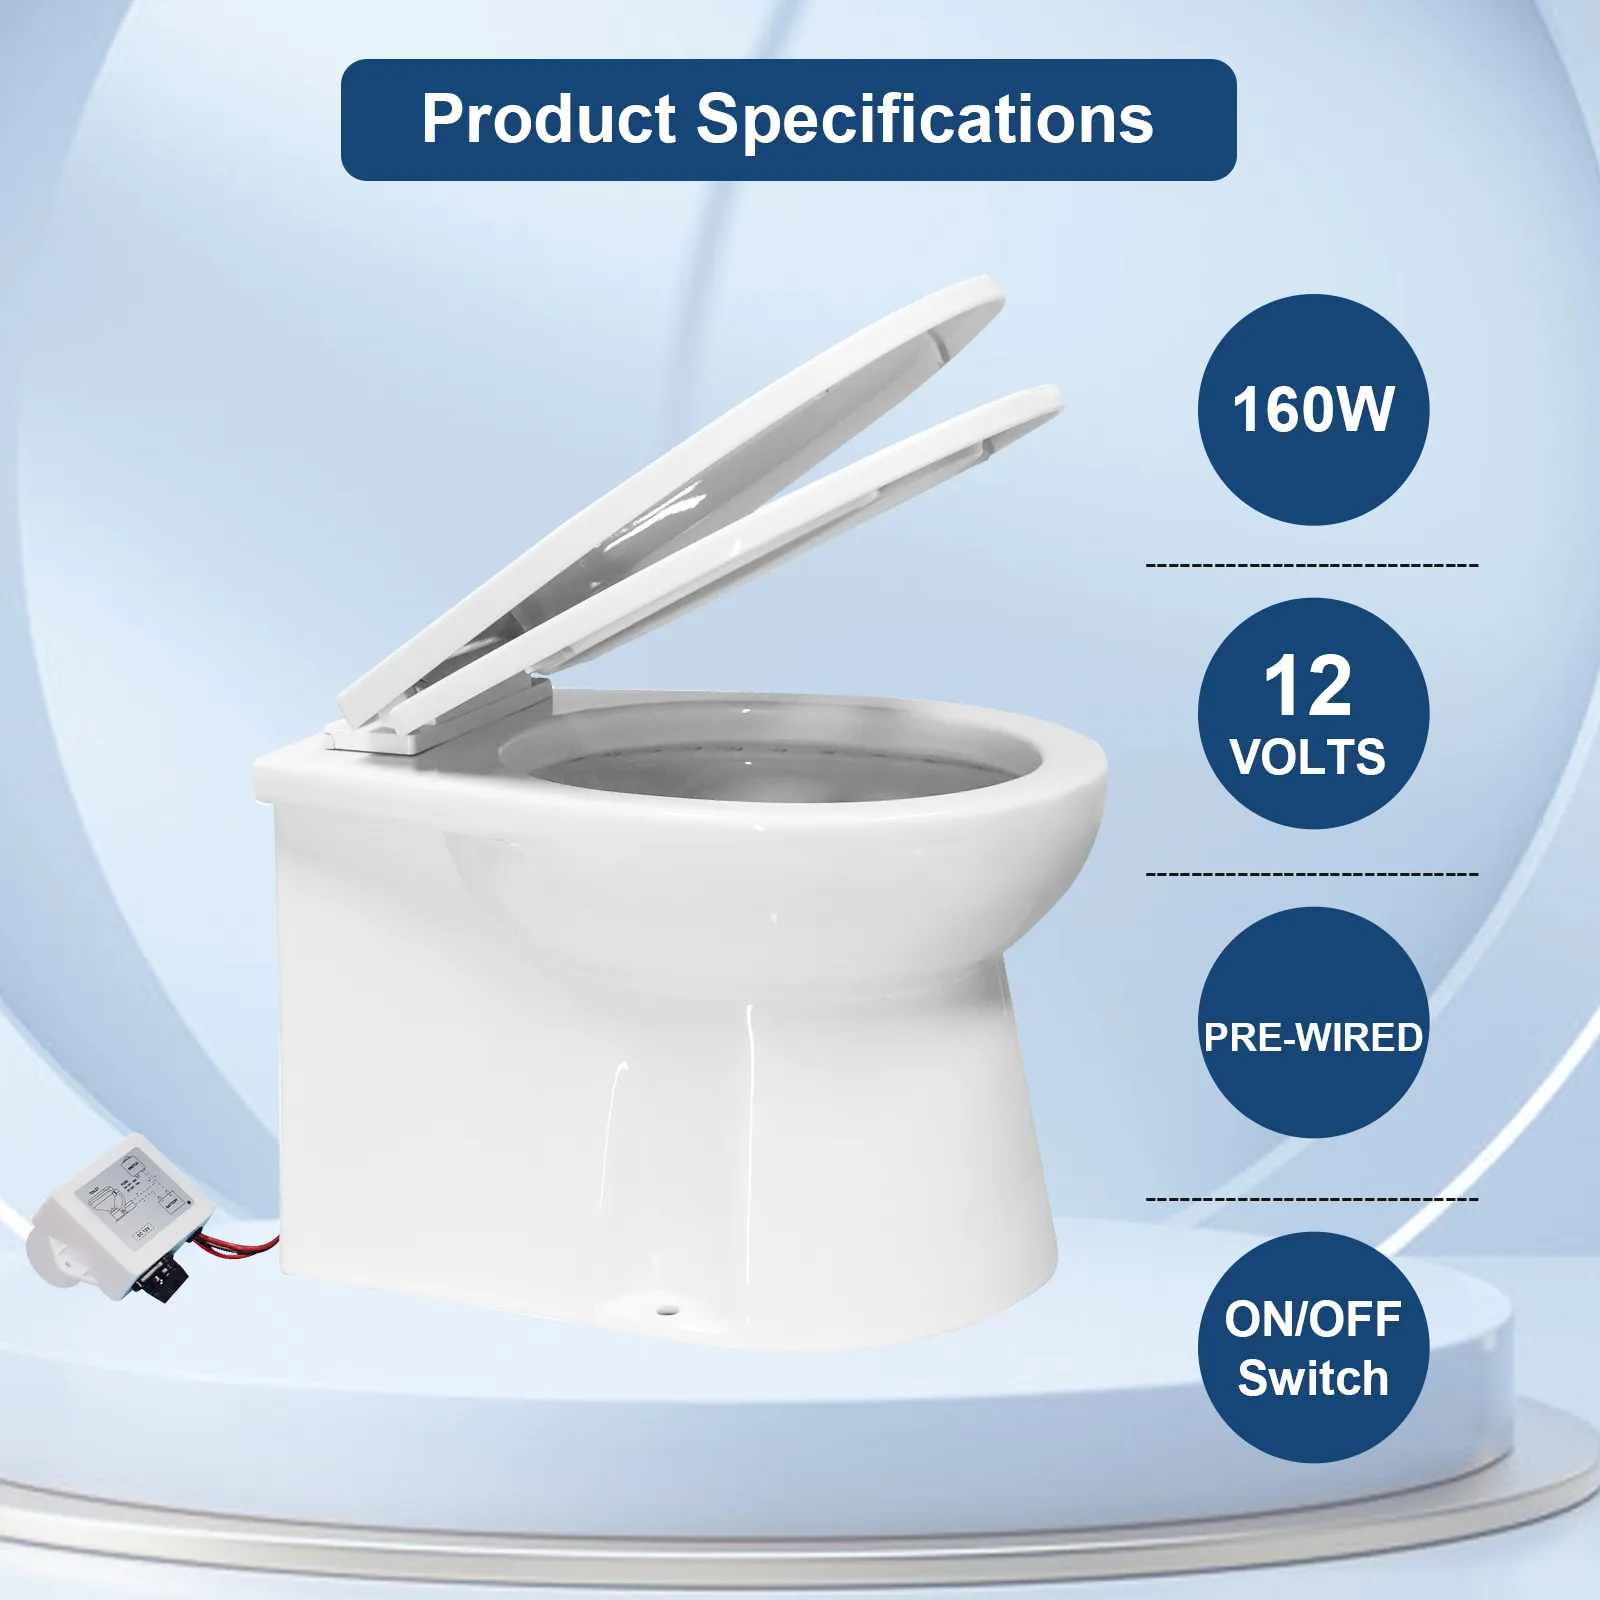 How Does A Marine Macerator Toilet Work?